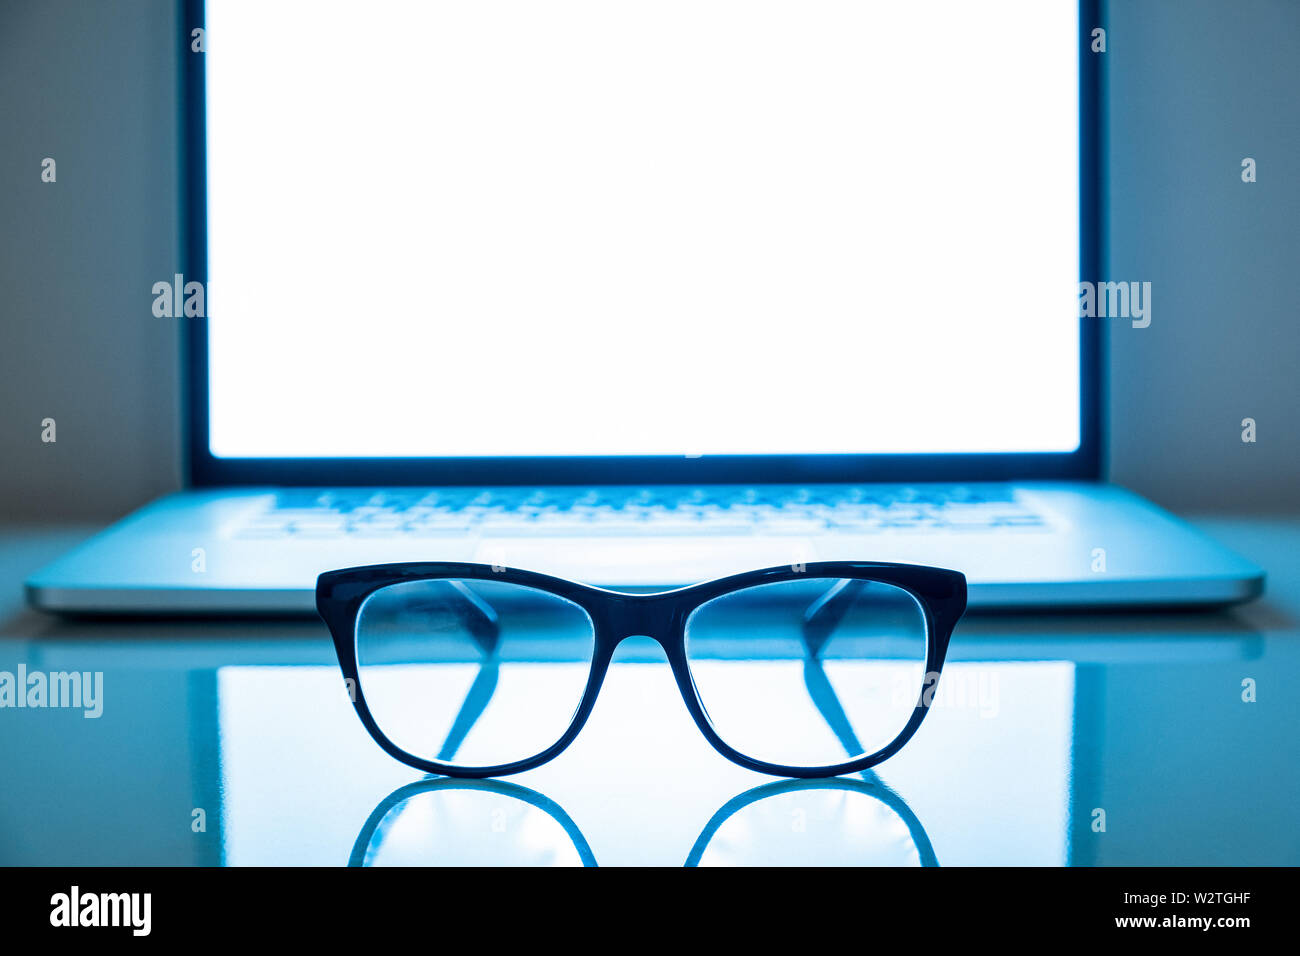 Computer eyeglasses in front of a laptop, low-key image. Blue light blockers and laptop in dark background, eye fatique problem concept Stock Photo